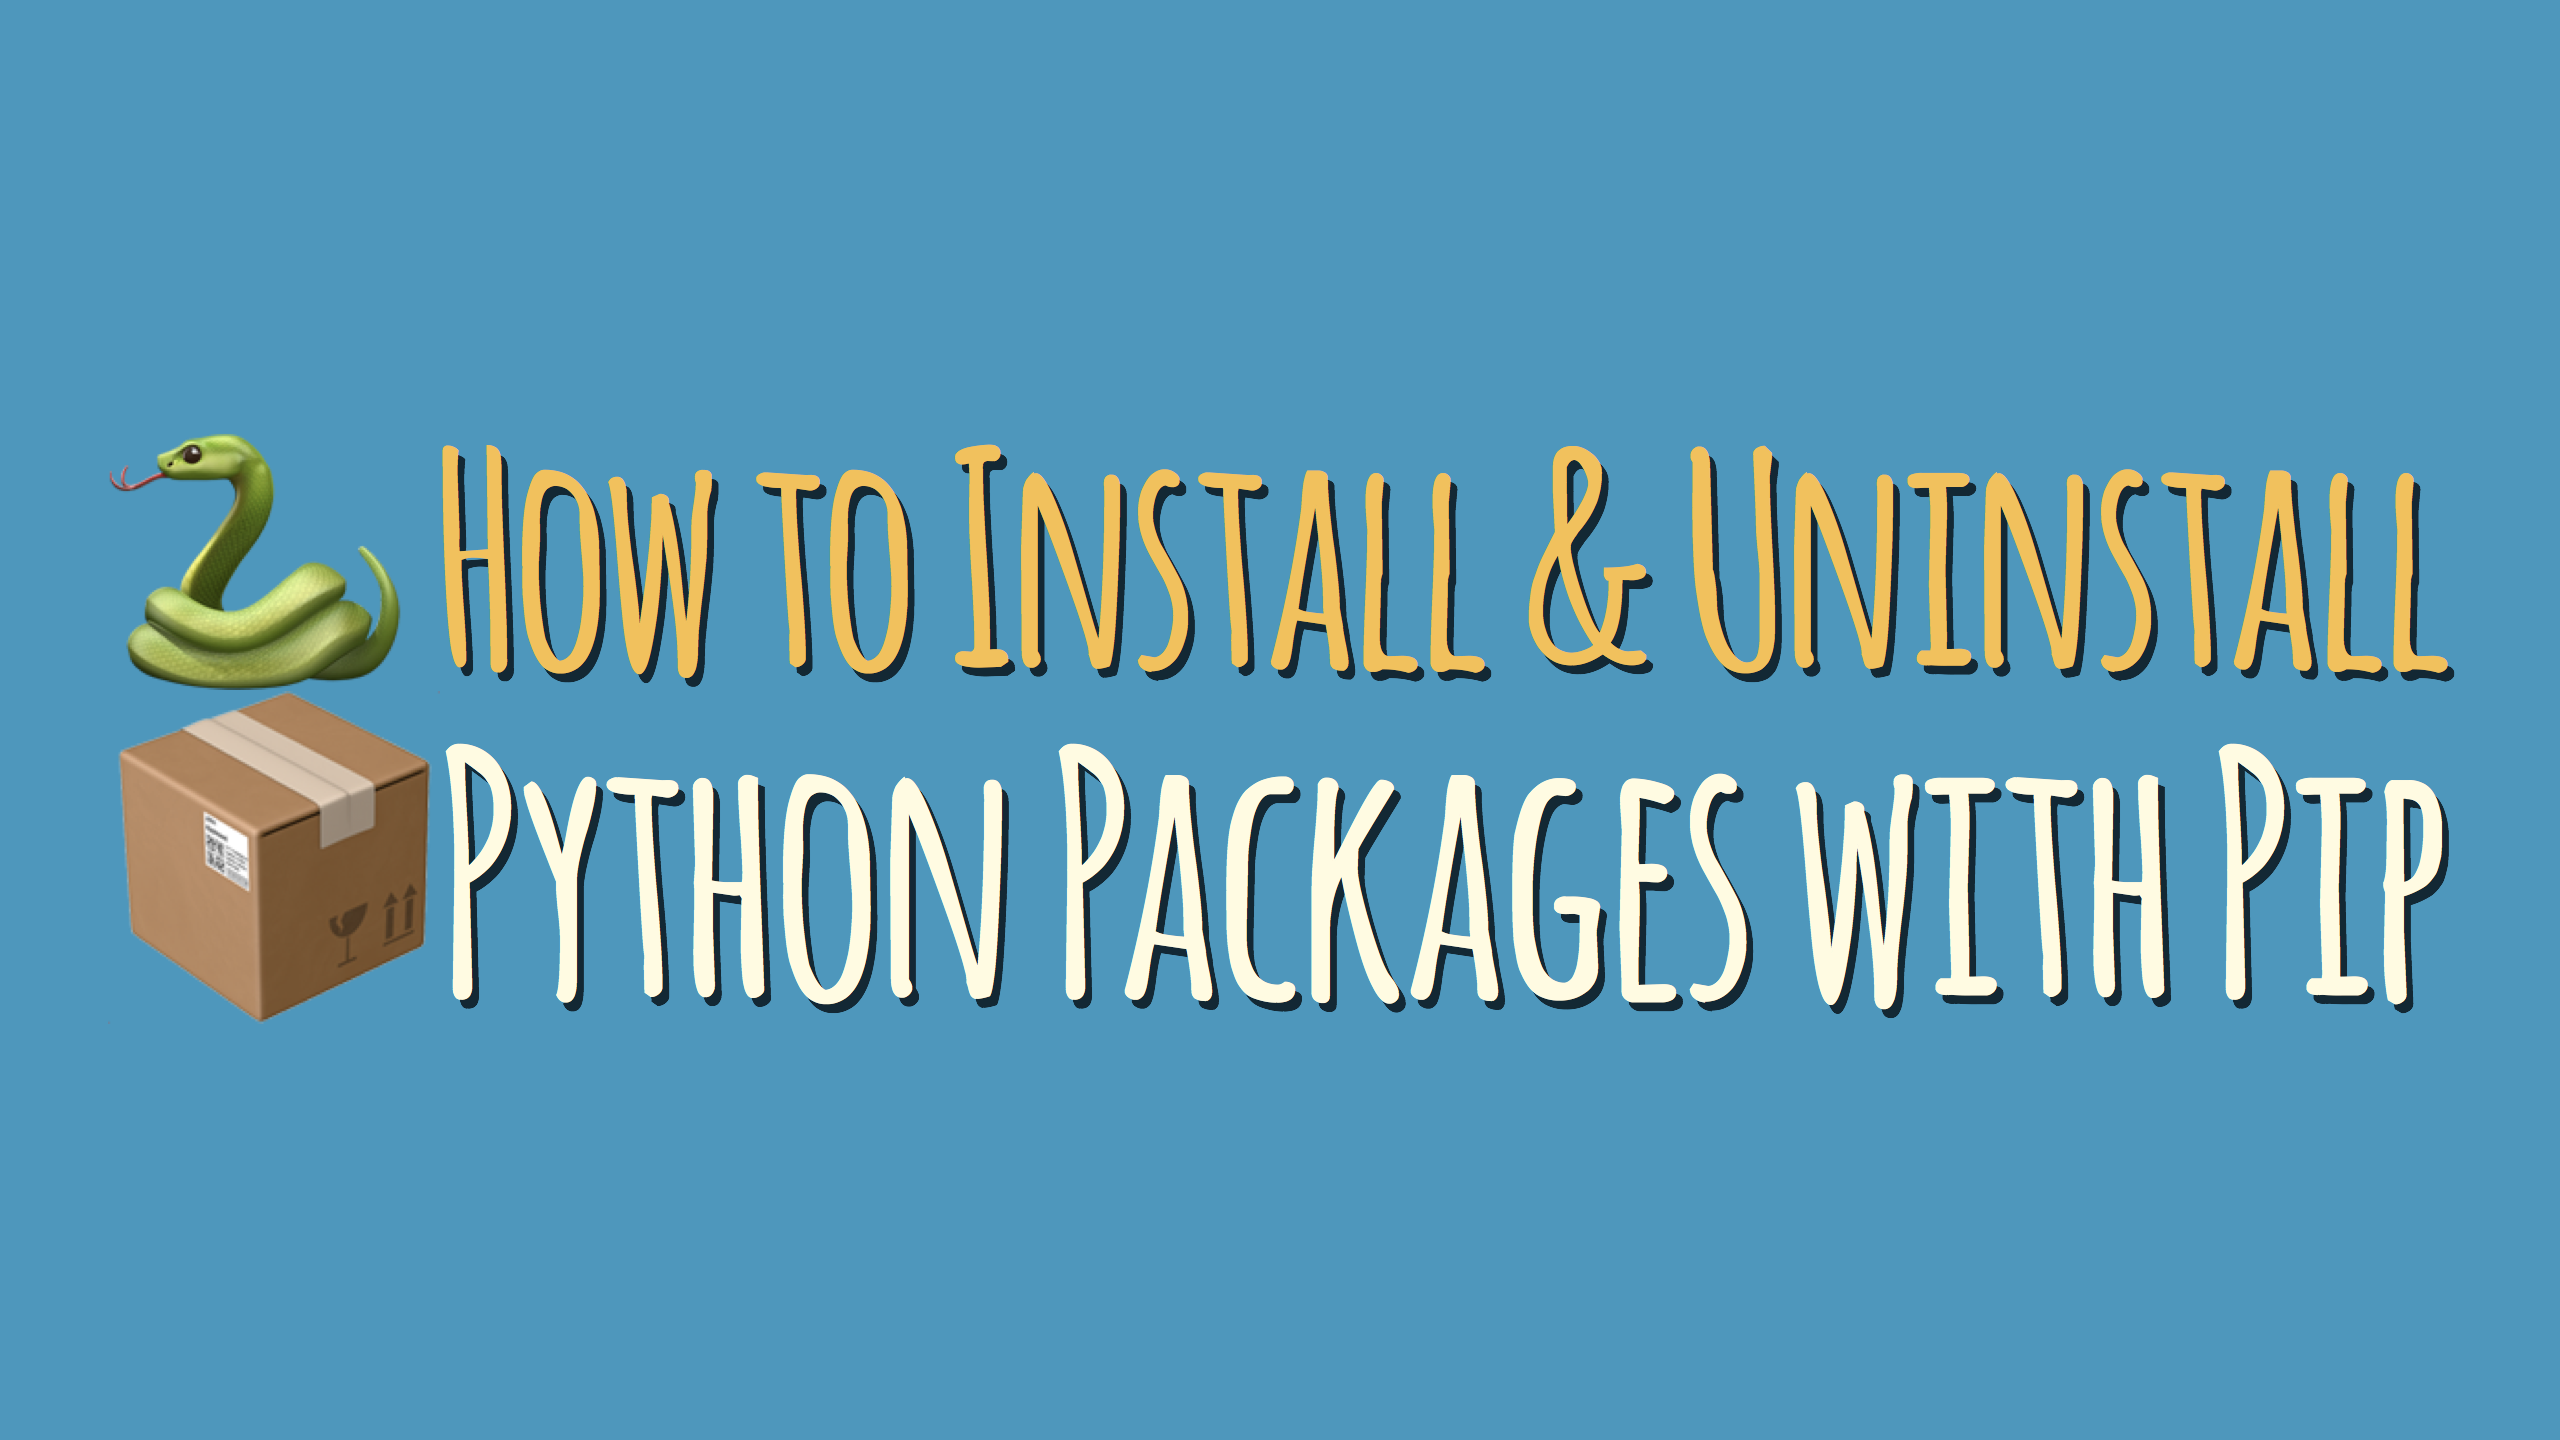 How to Install and Uninstall Python Packages Using Pip